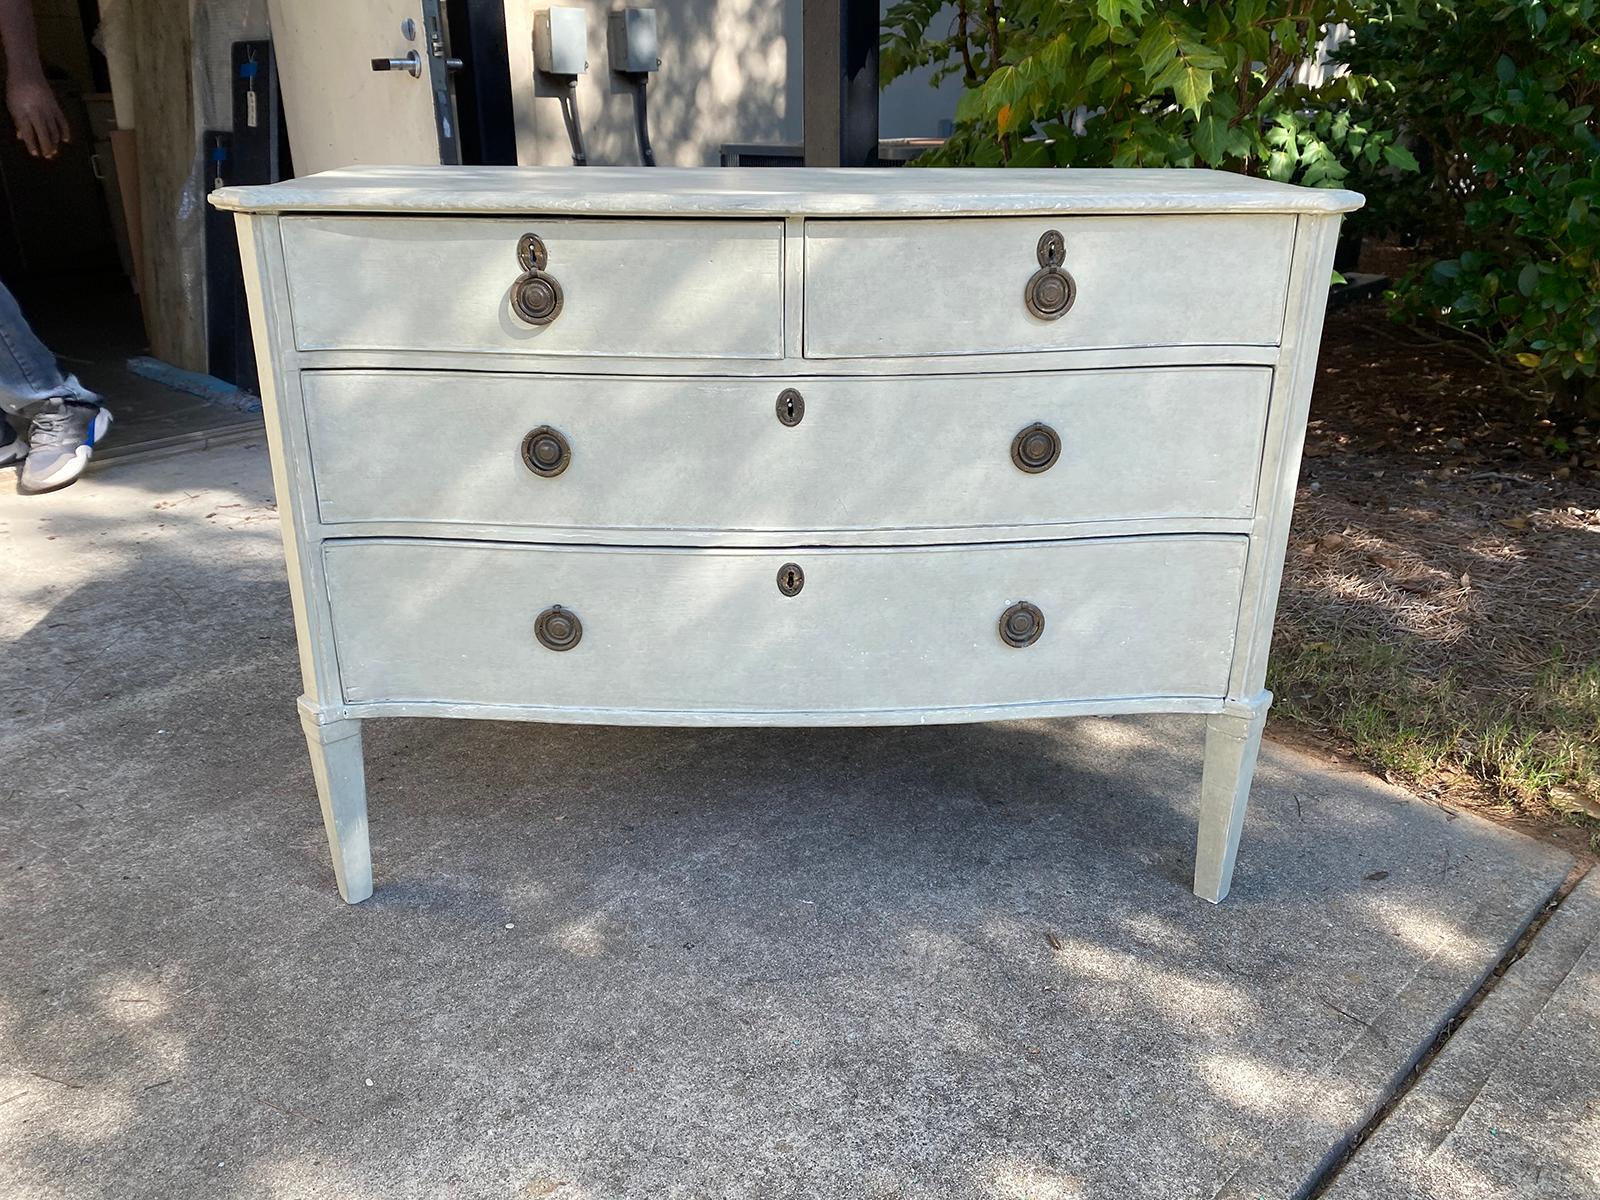 19th-early 20th century Italian four-drawer commode with custom painted finish
blue / green / gray hand painted custom finish.